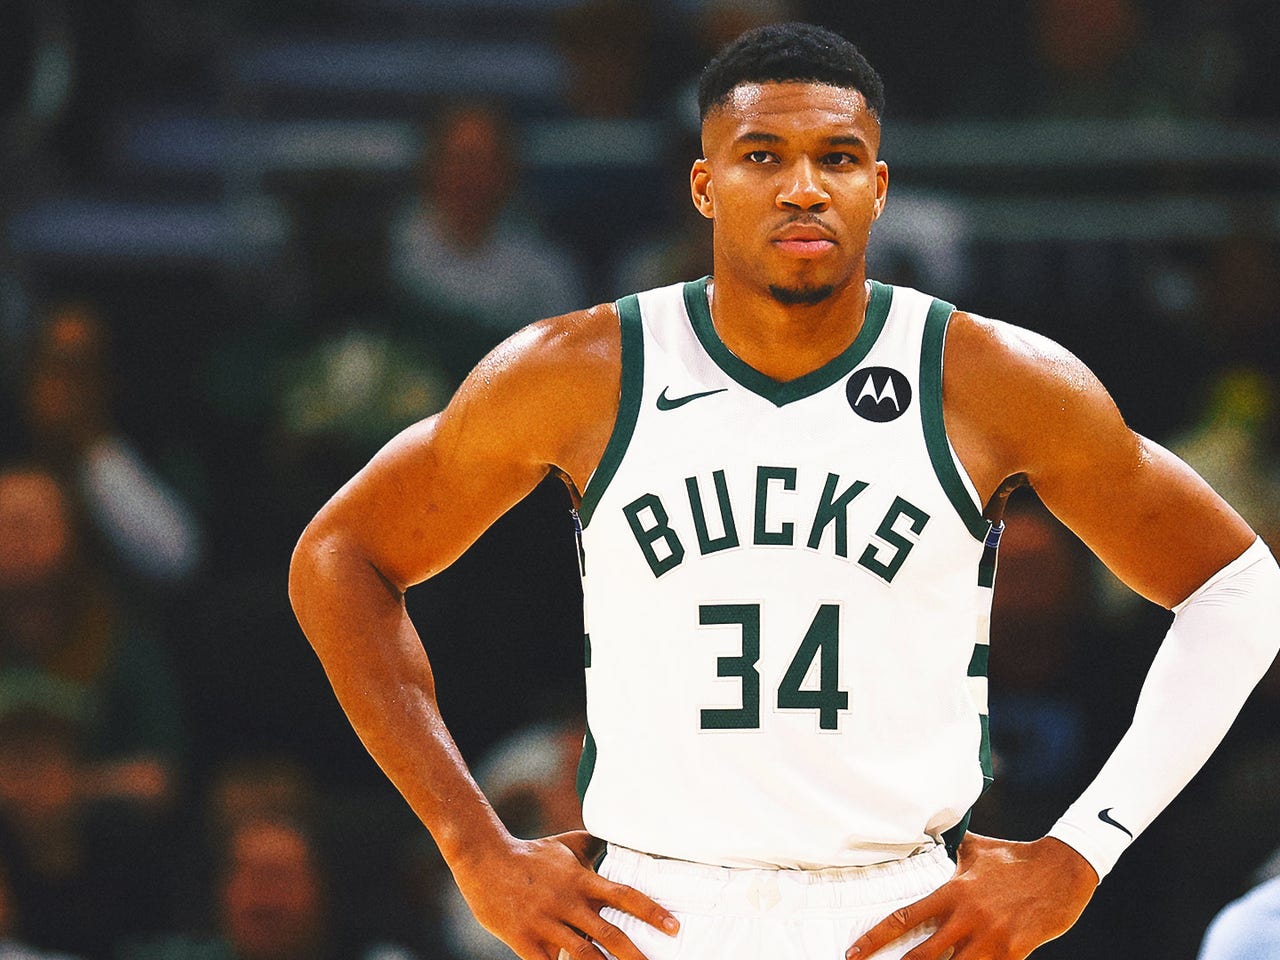 The Warriors' rebuild could start with. Antetokounmpo!